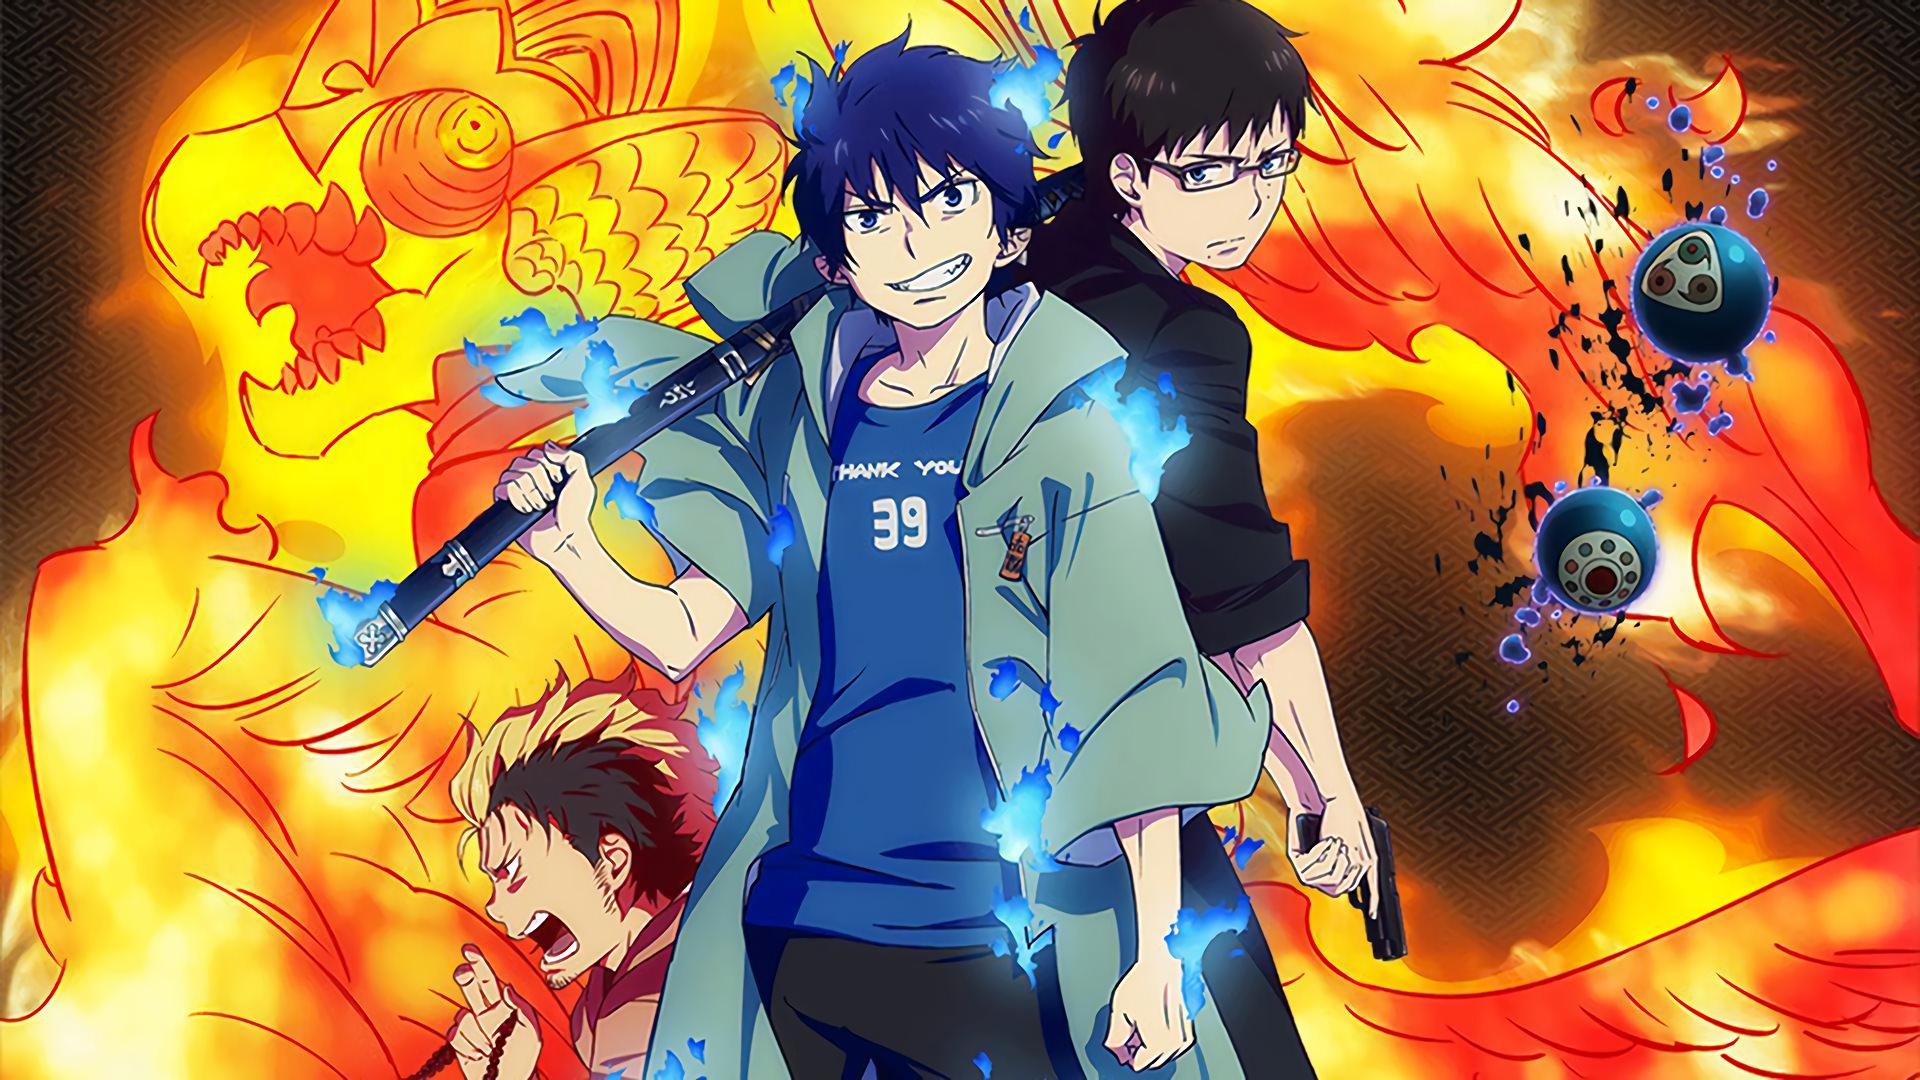 Blue Exorcist Wallpapers Top Free Blue Exorcist Backgrounds Wallpaperaccess